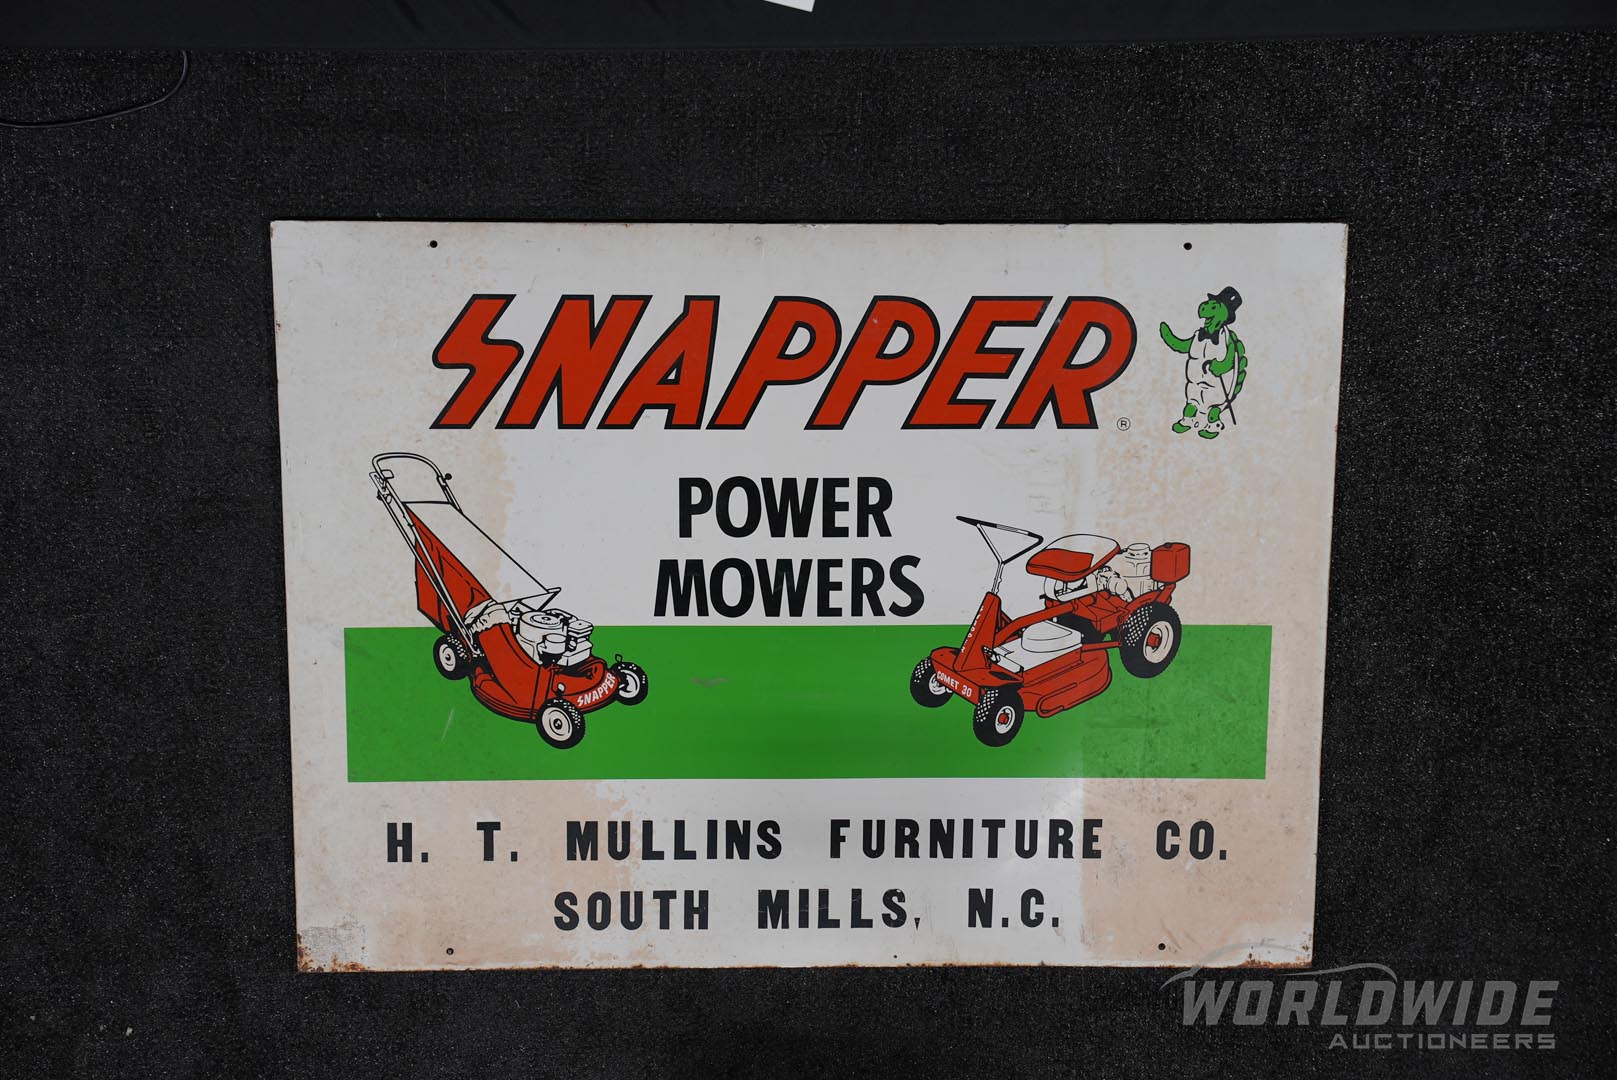  Snapper Power Mowers Painted T in Sign 